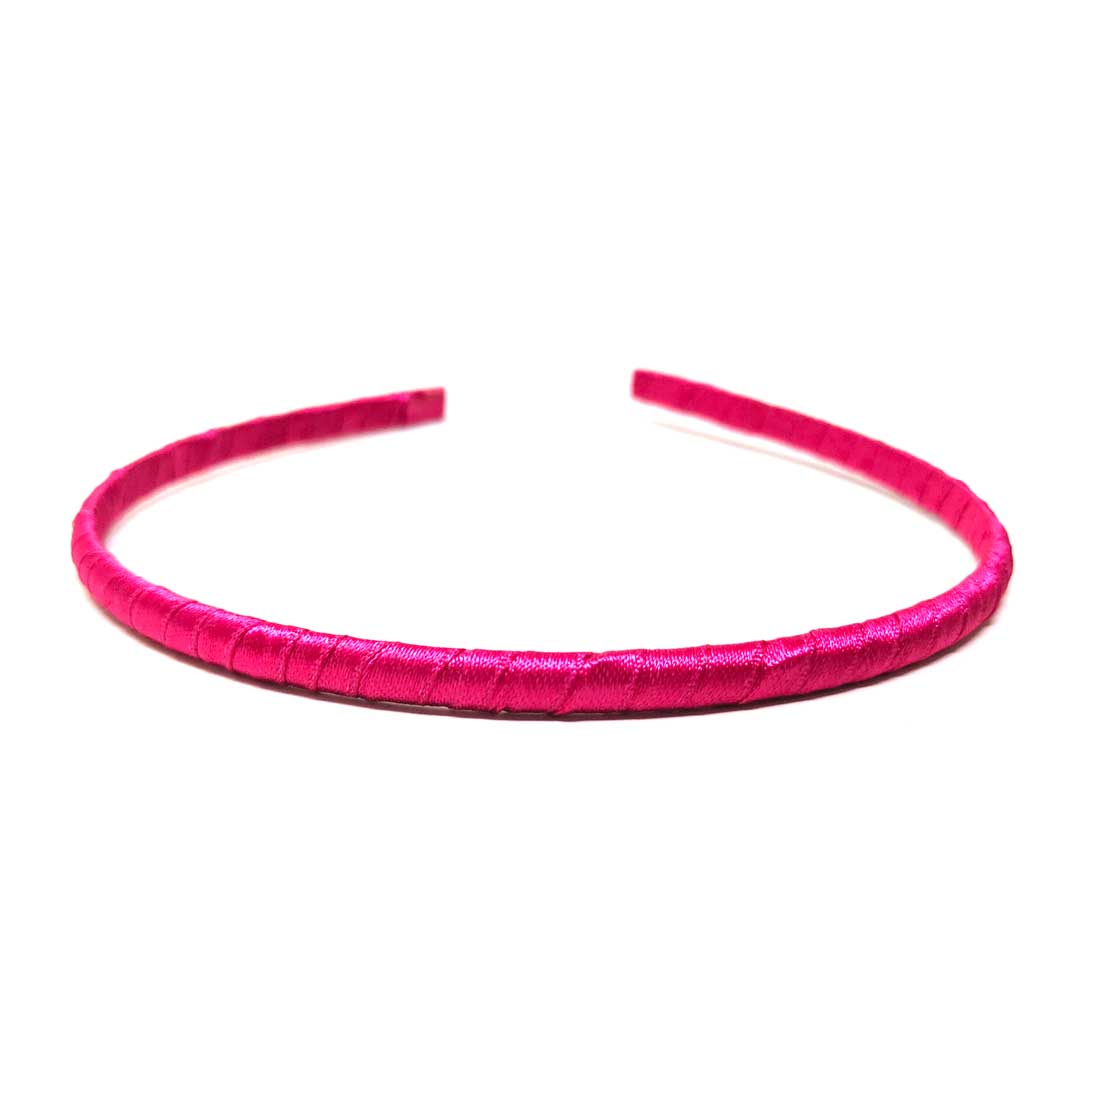 Anokhi Ada Ribbon on Plastic Hairbands / Headbands for Kids and Girls (Multi-Colour, Pack of 5) - 09-06H